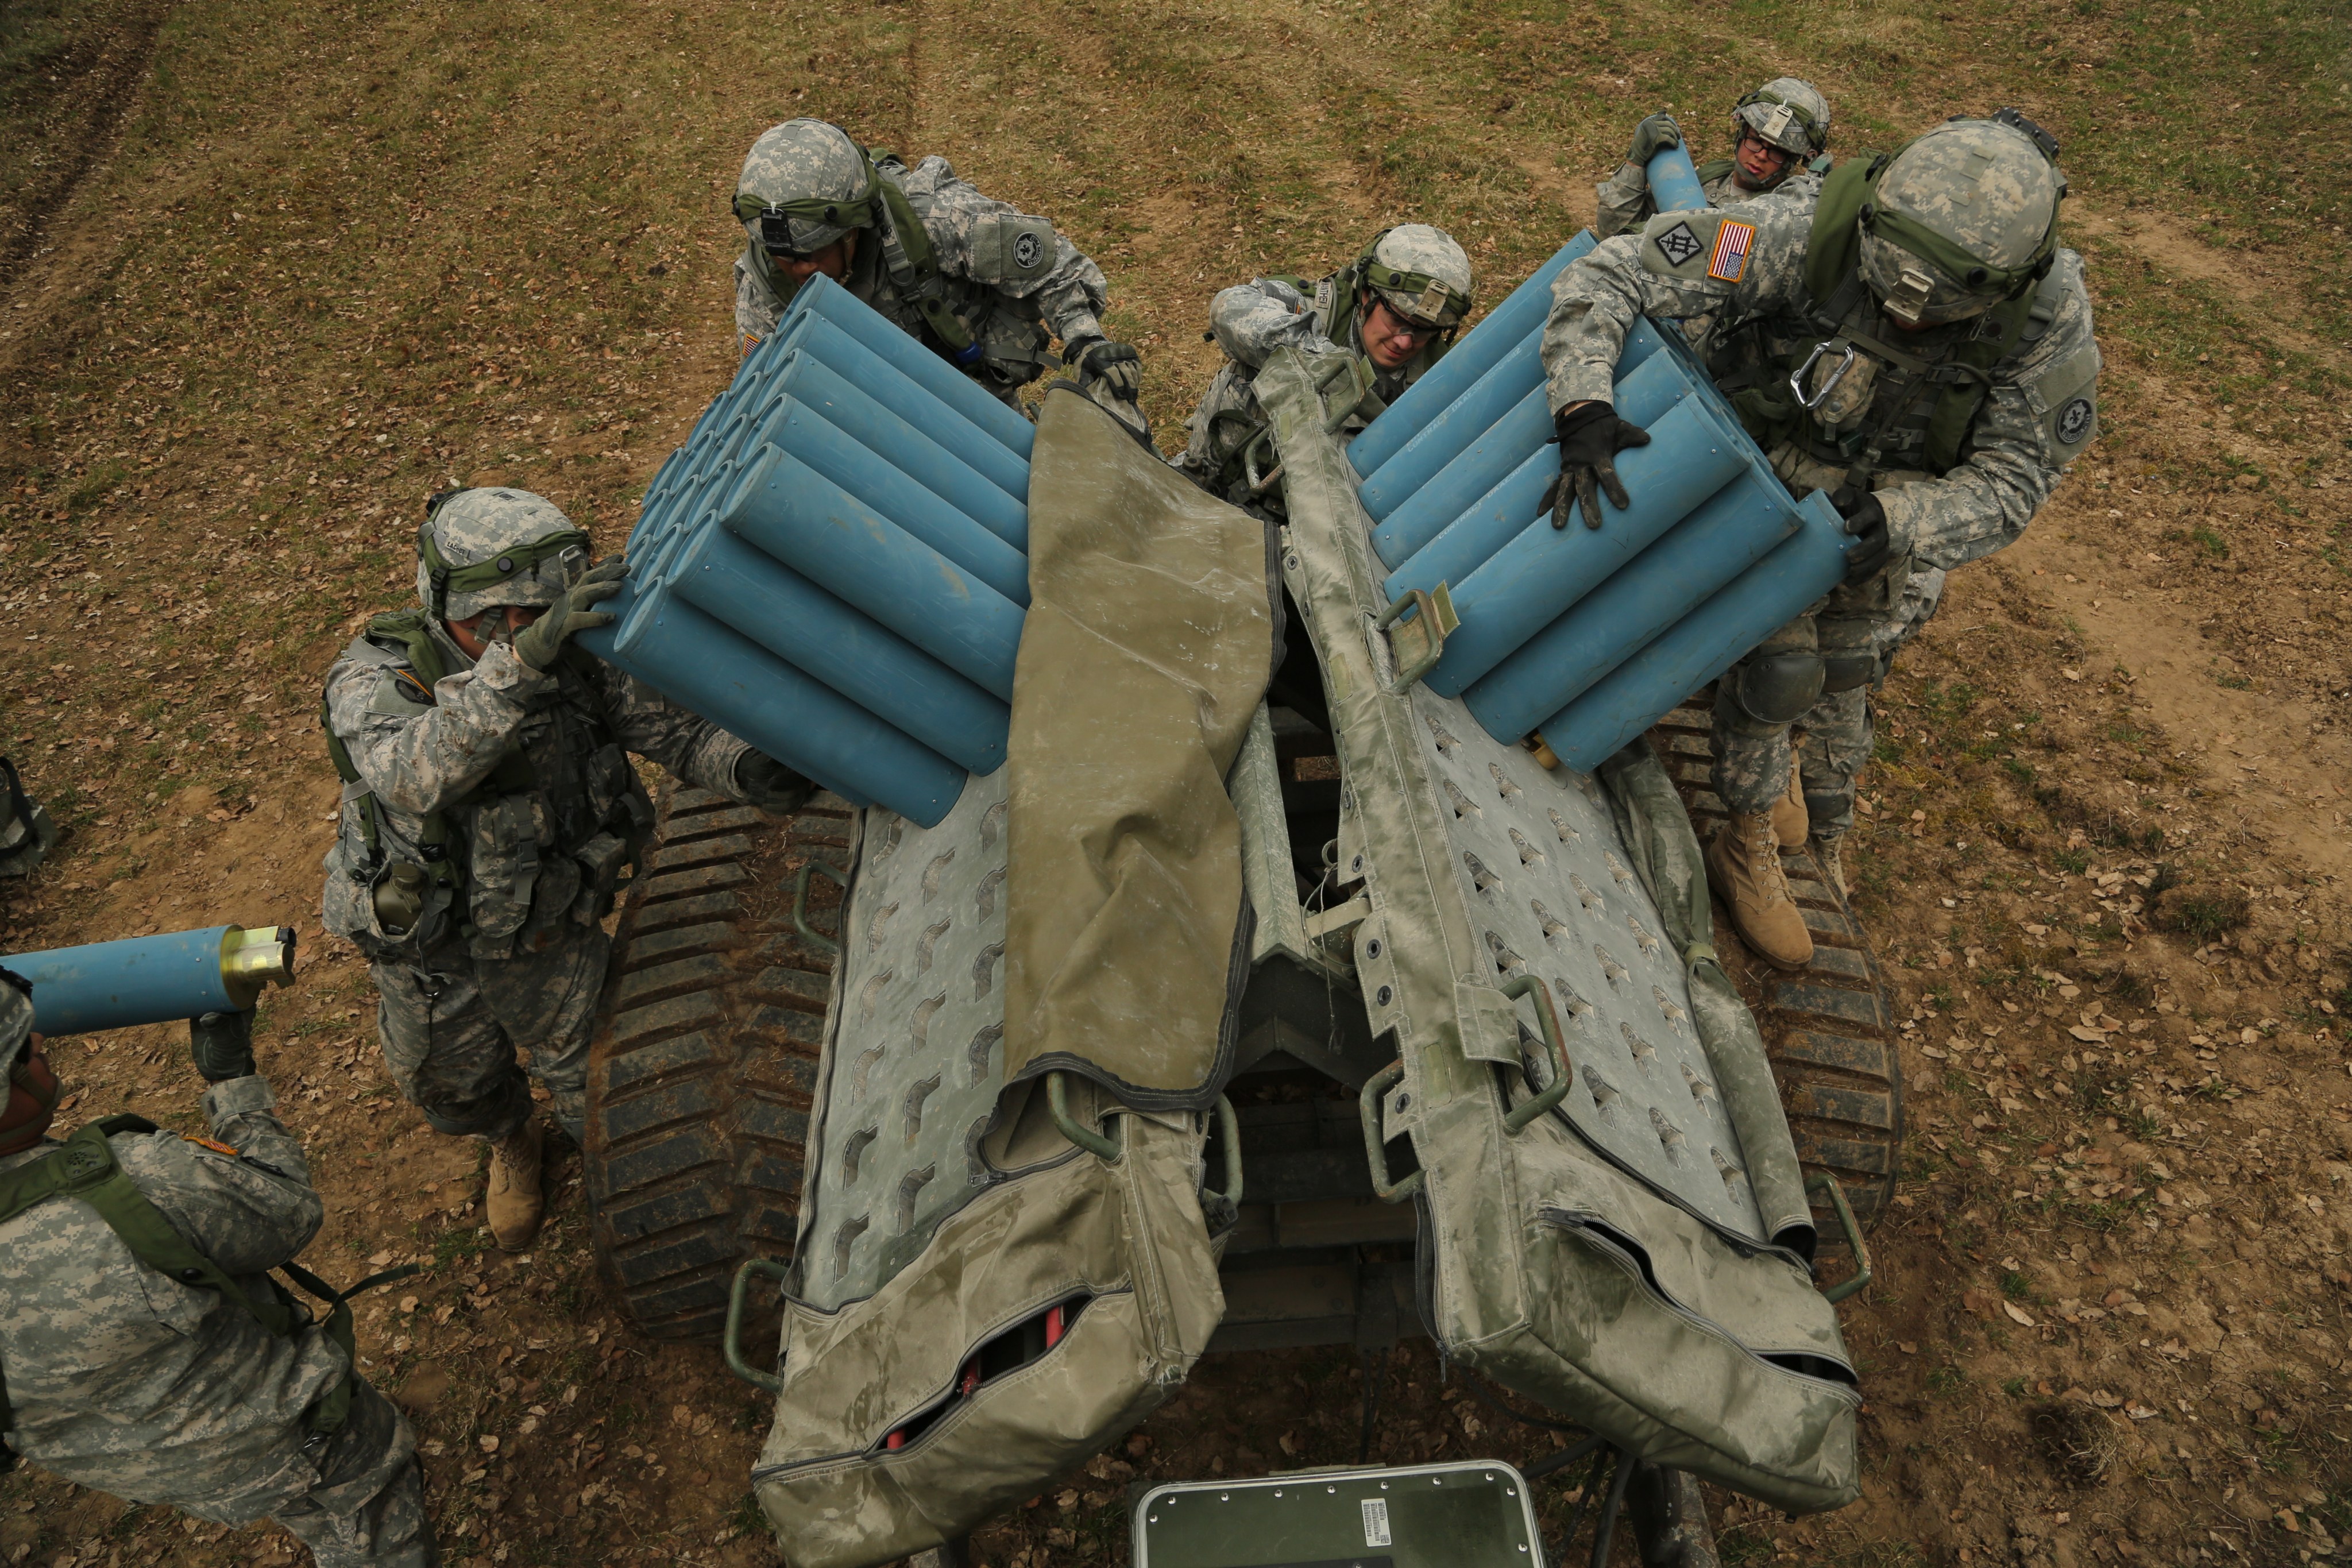 Taiwan hopes to receive the Volcano mine system, pictured during a US military exercise in Germany, by 2029. Photo: Handout